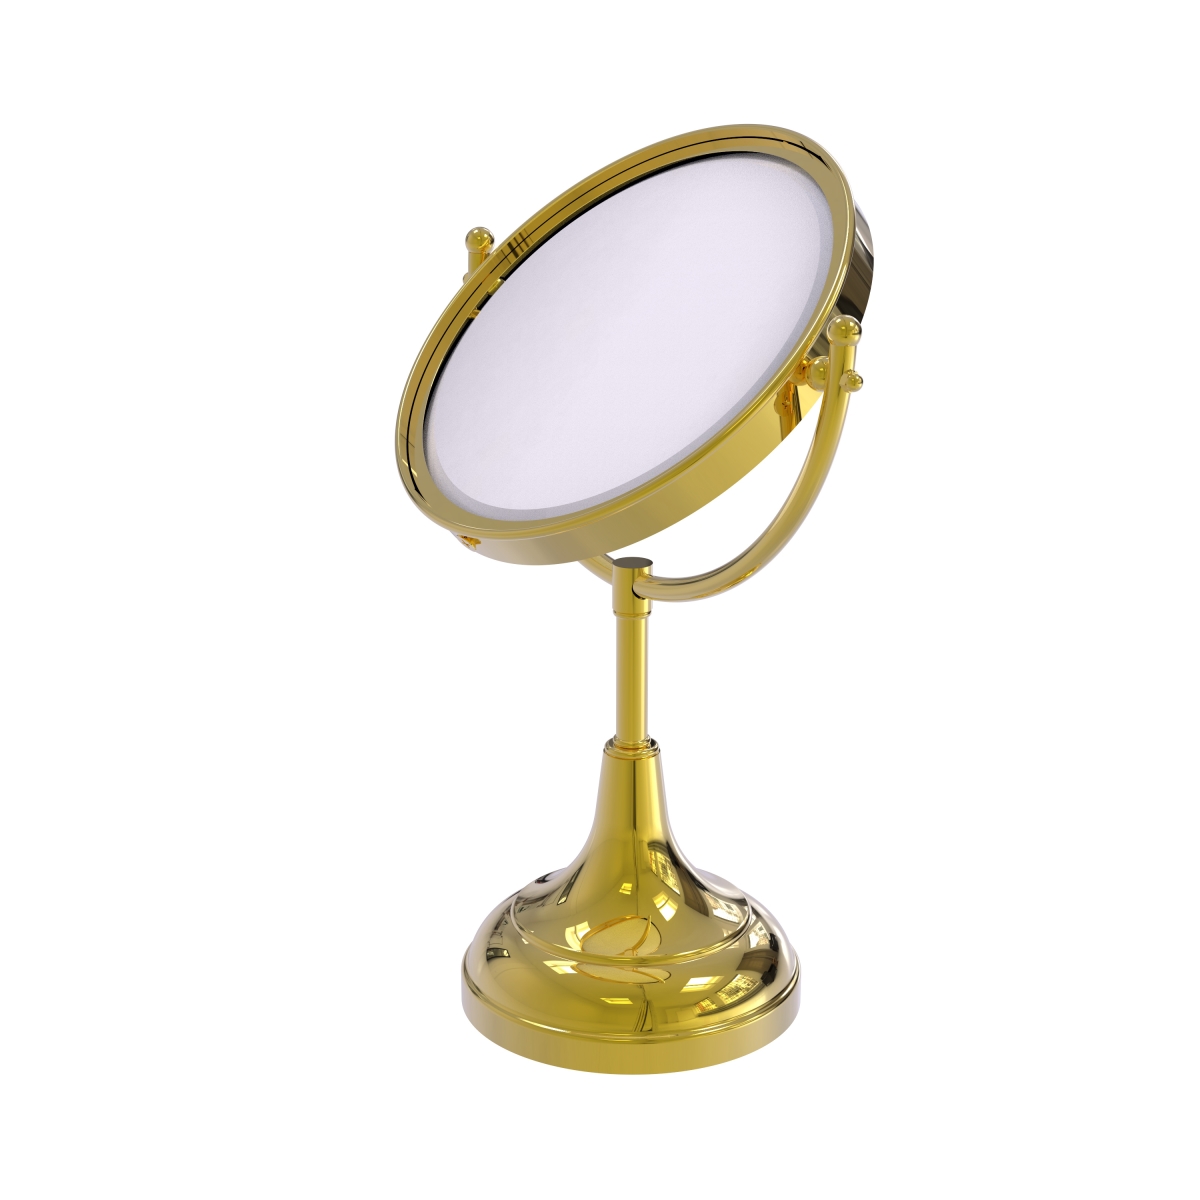 Picture of Allied Brass DM-2-2X-PB 8 in. Vanity Top Make-Up Mirror 2X Magnification, Polished Brass - 15 x 8 x 8 in.